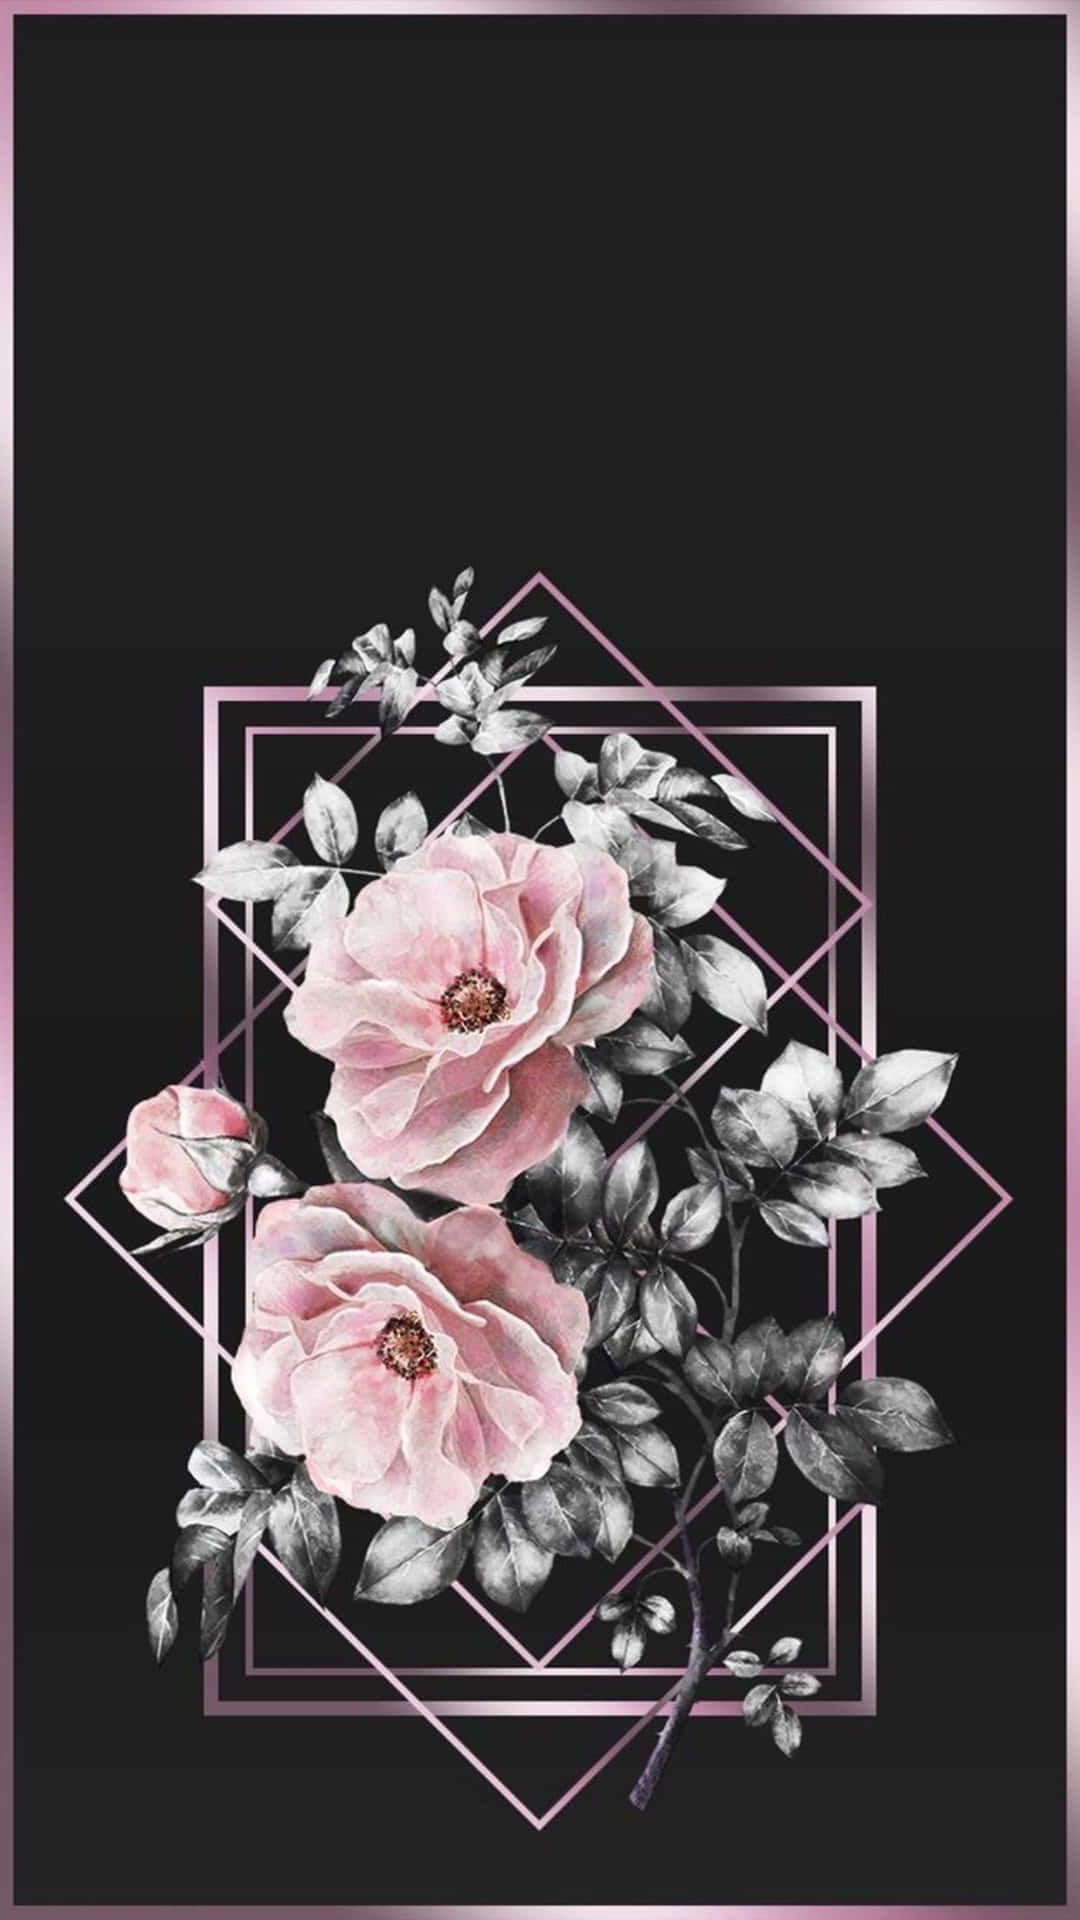 Brighten up your day with this colorful floral aesthetic iPhone wallpaper! Wallpaper